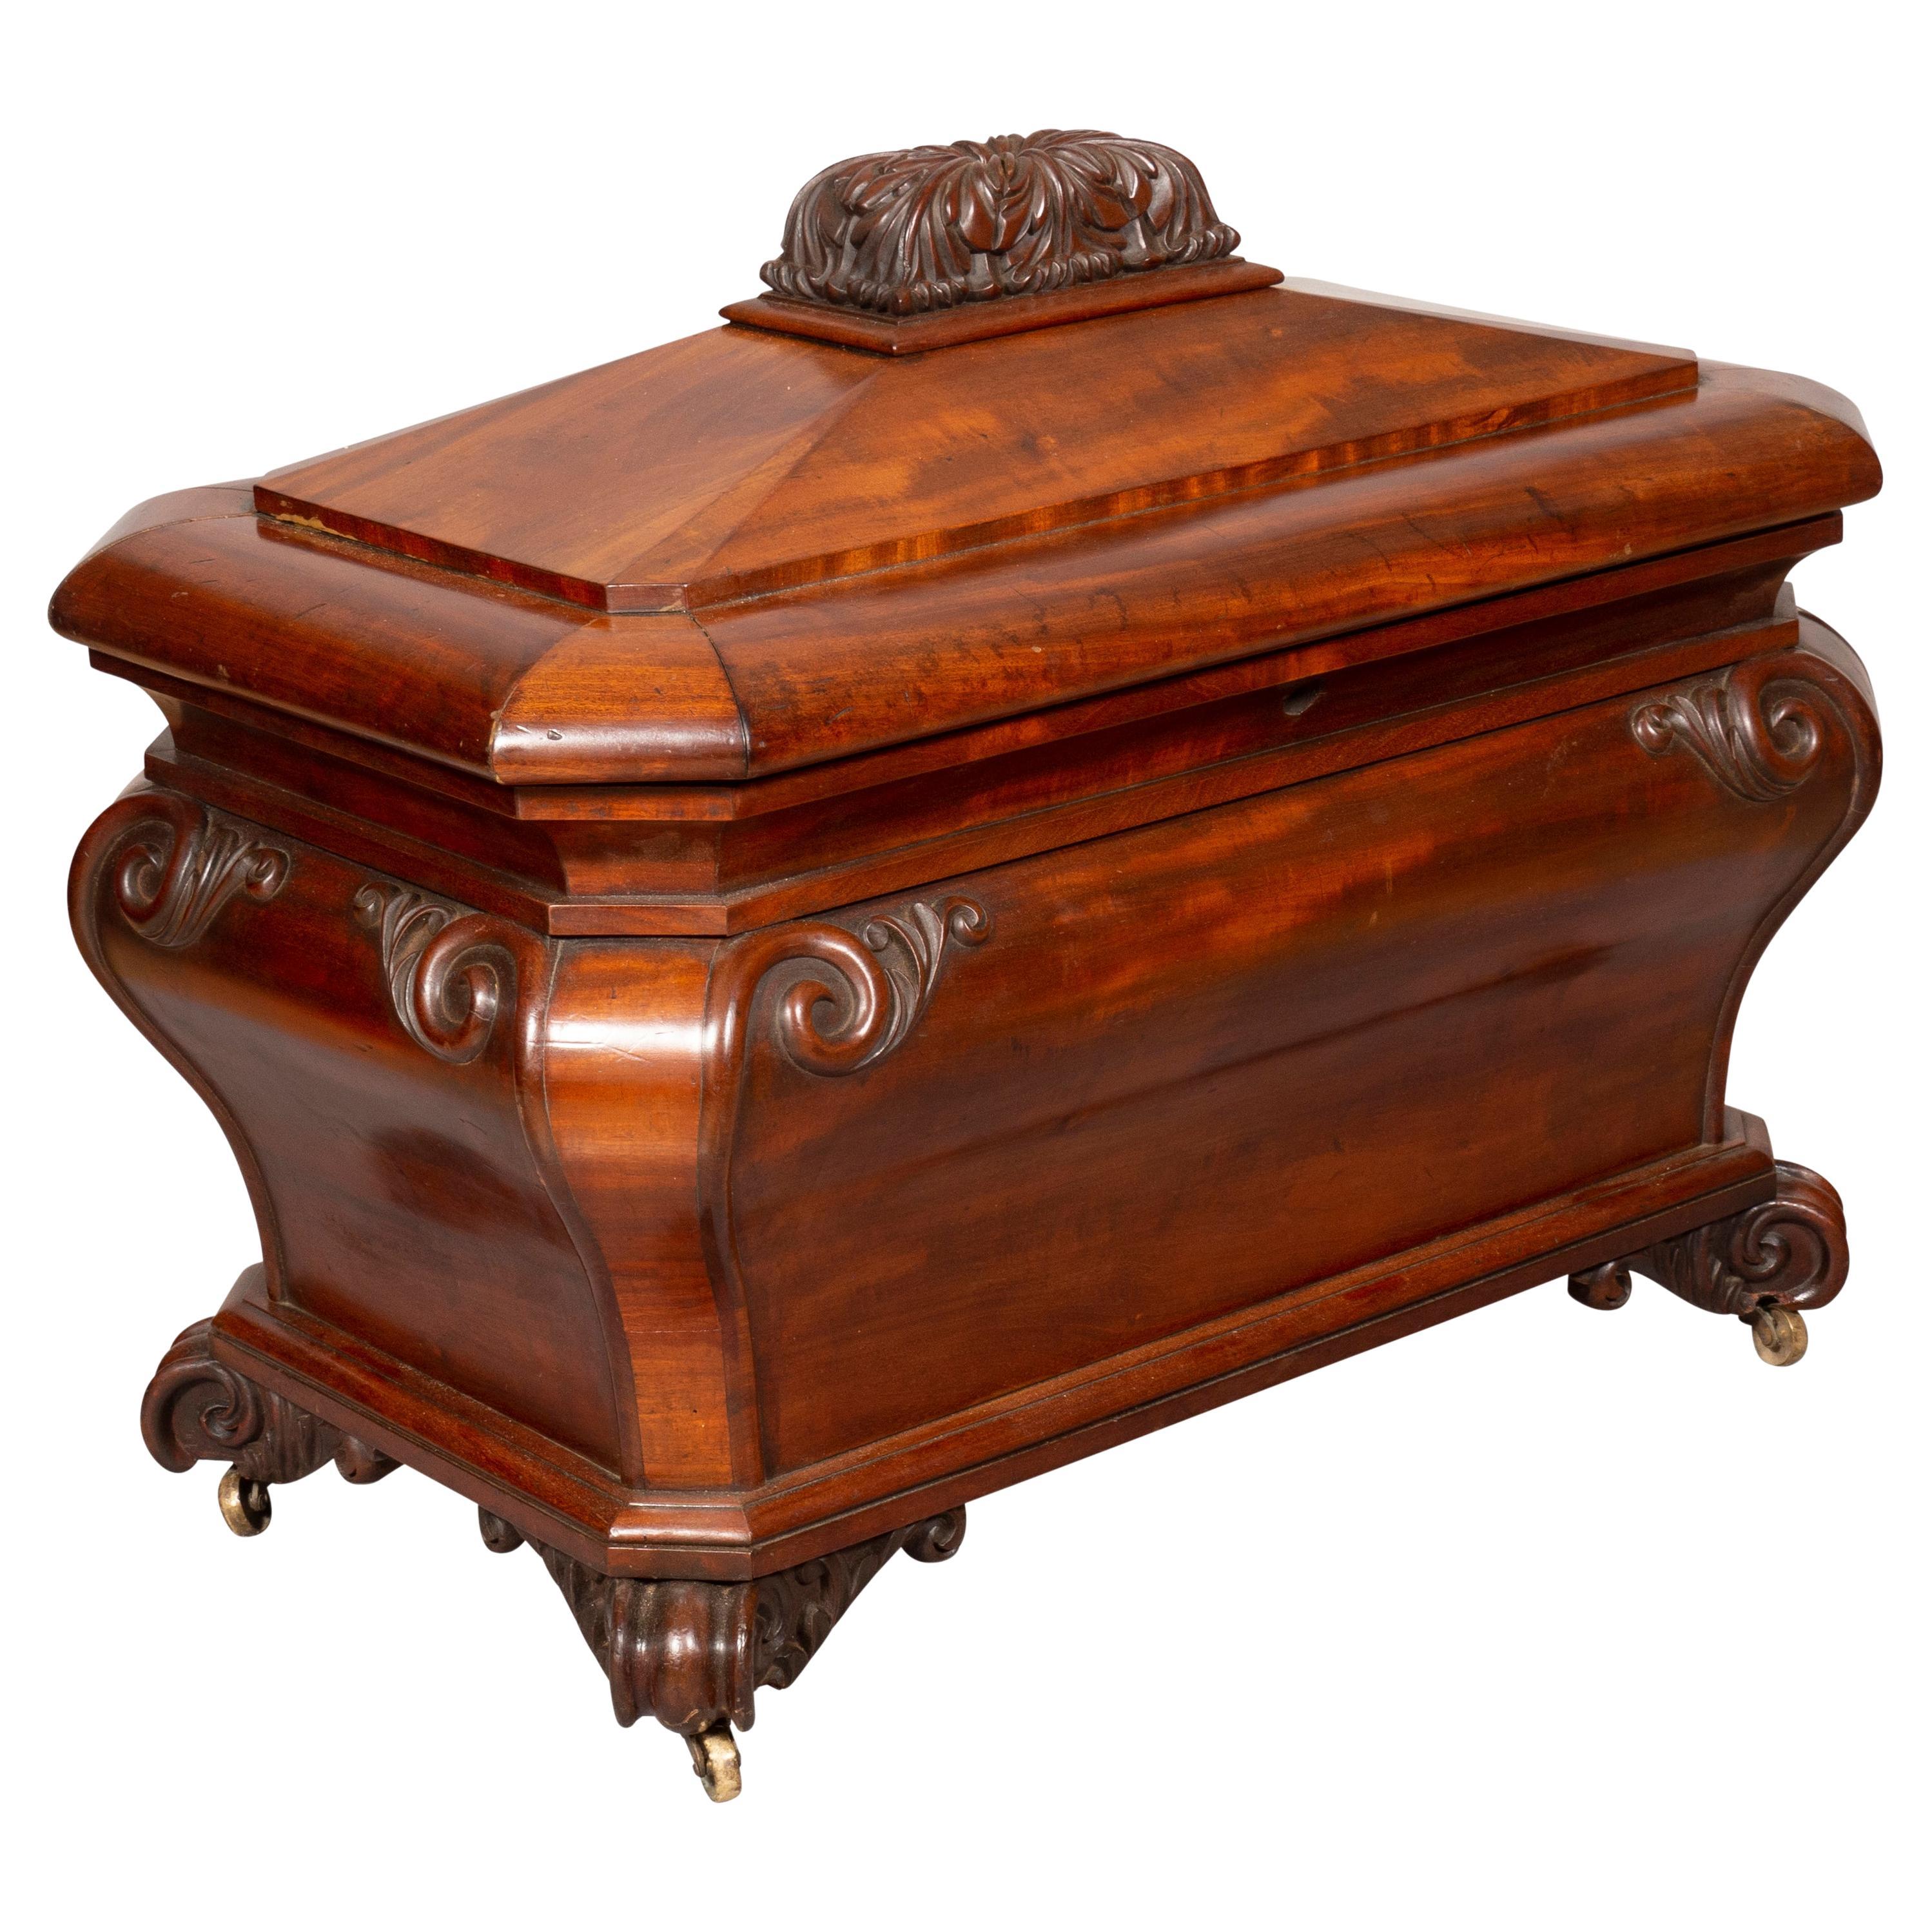 Rectangular hinged and domed top with carved finial opening to a well , lower conforming serpentine bombe case with scroll carved corners, carved scroll feet. Casters.